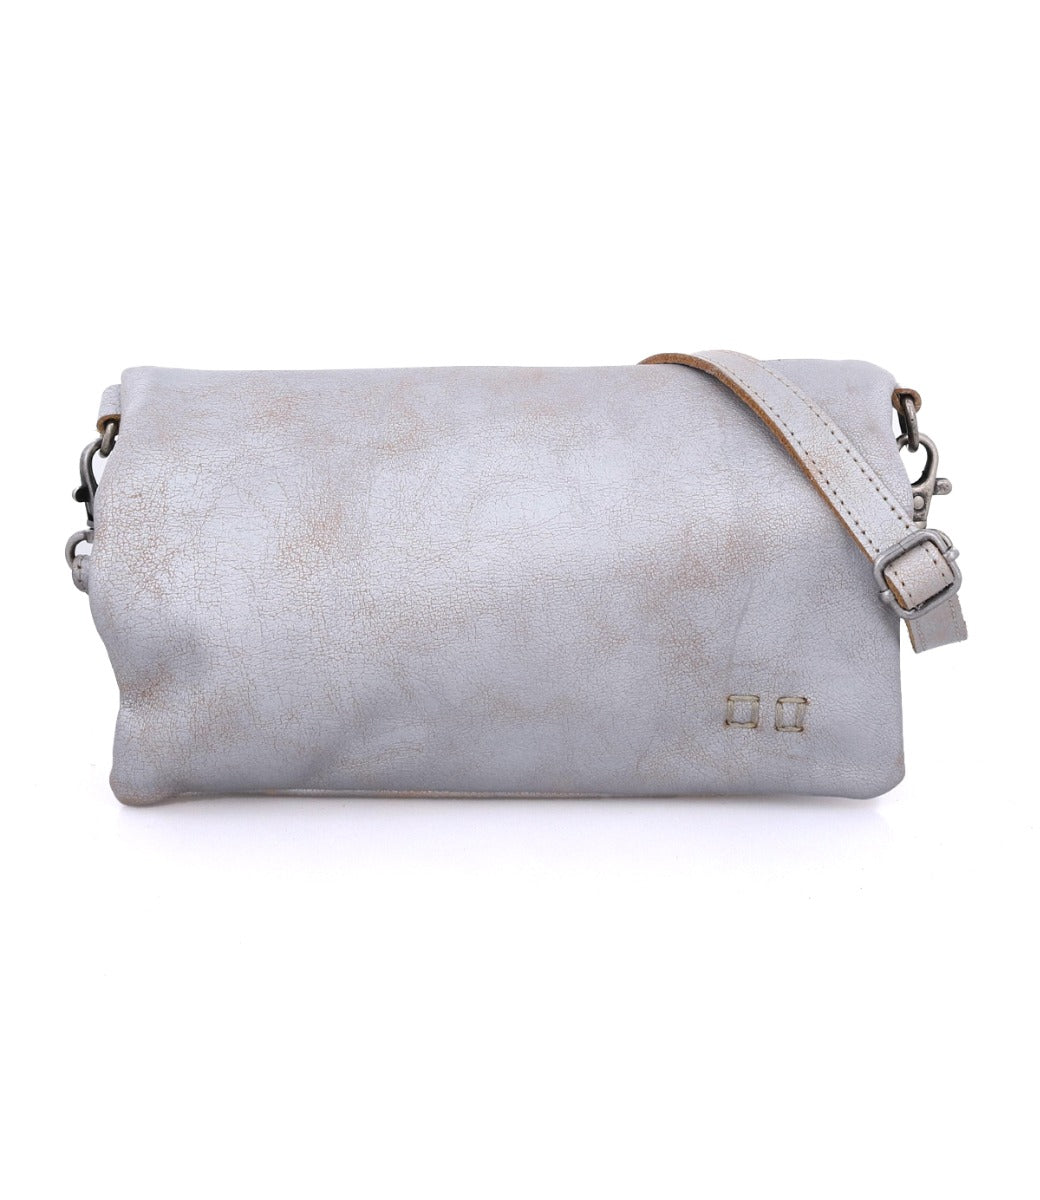 A Bed Stu Cadence silver leather crossbody bag with an adjustable strap.